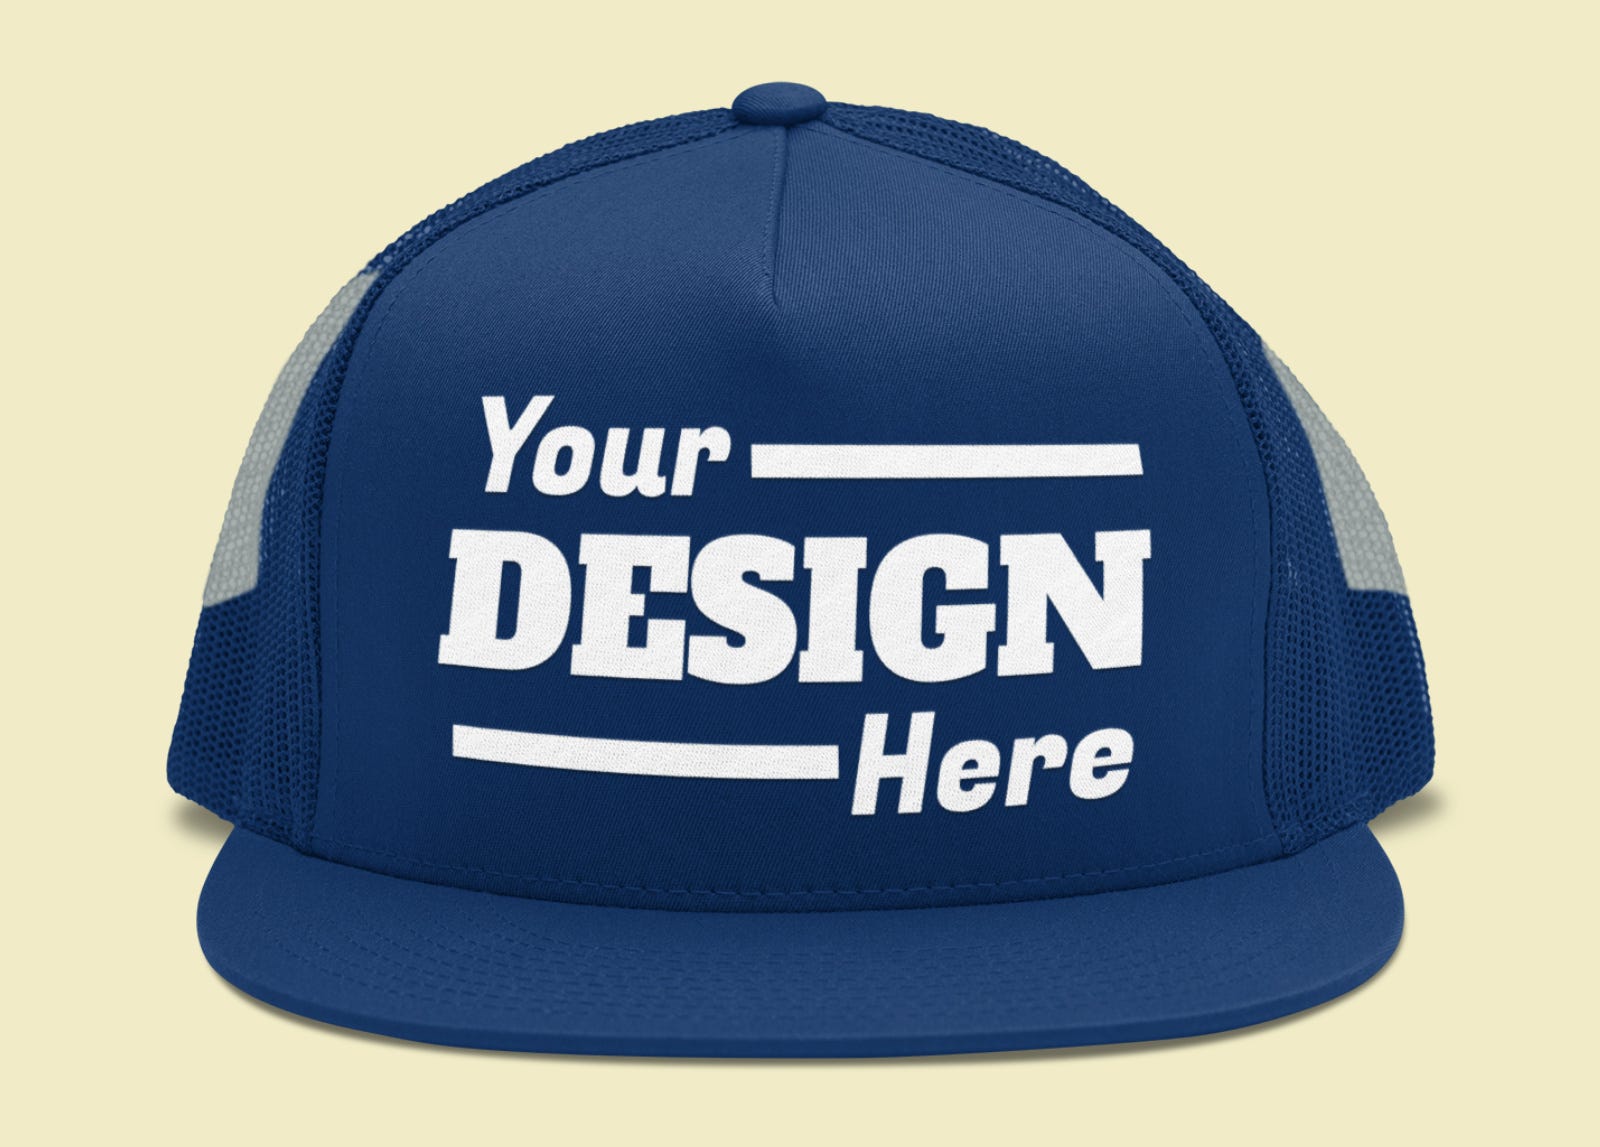 Custom hats from TeeShirtPalace are a fun and unique way to show off your personal style. With a variety of hat styles, colors, and design options to choose from, you can create a one-of-a-kind accessory that perfectly fits your personality. Whether you want to add your name, a favorite quote, or a custom graphic, TeeShirtPalace makes it easy to design your own custom hat that's both stylish and functional. So why settle for a plain, boring hat when you can create something that truly stands out? Try TeeShirtPalace's custom hat design tool today and start expressing yourself in a whole new way.